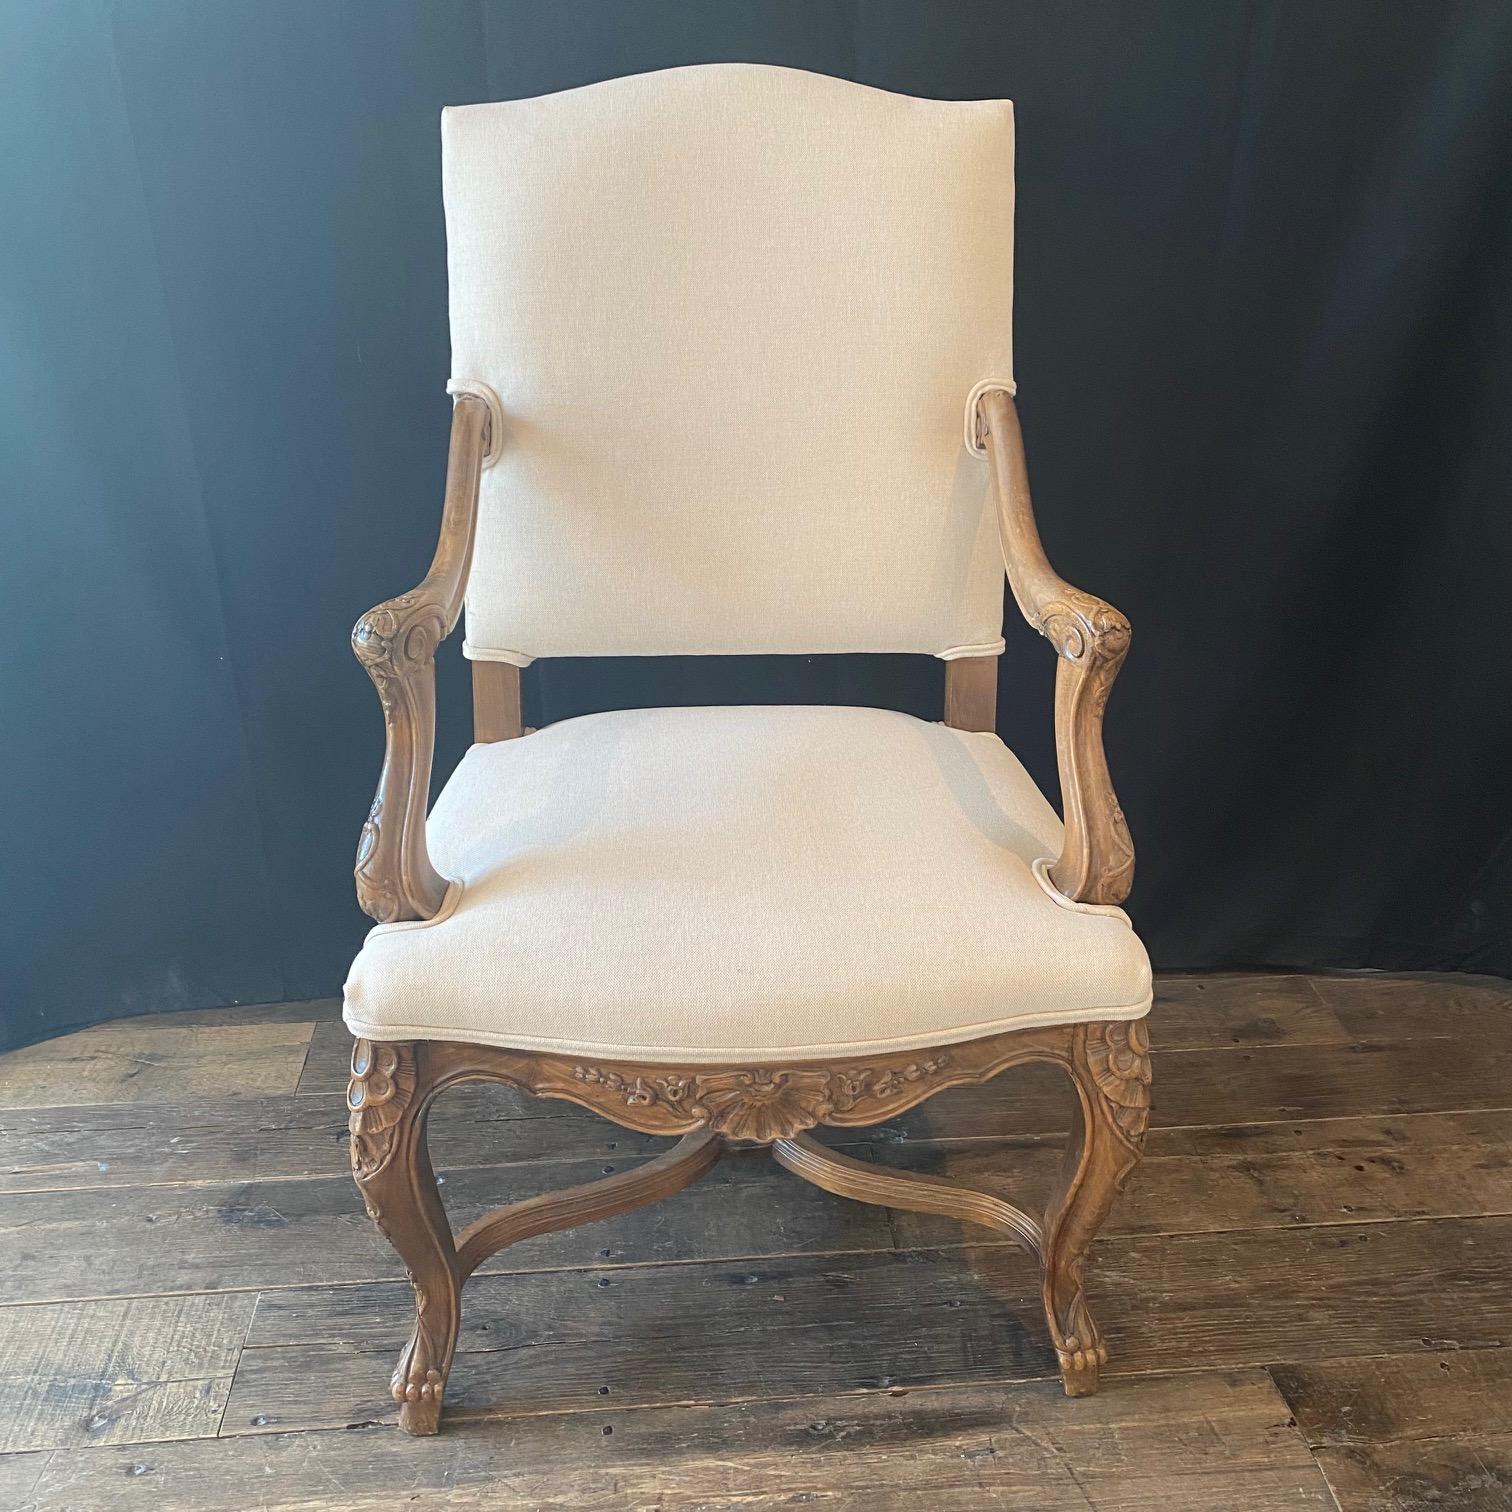 Lovely pair of carved antique French Louis XV armchairs with new neutral British upholstery sculpted from fine walnut featuring exquisitely formed frameworks with subtly arched seatback crowns, gracefully scrolled armrests, and undulating aprons